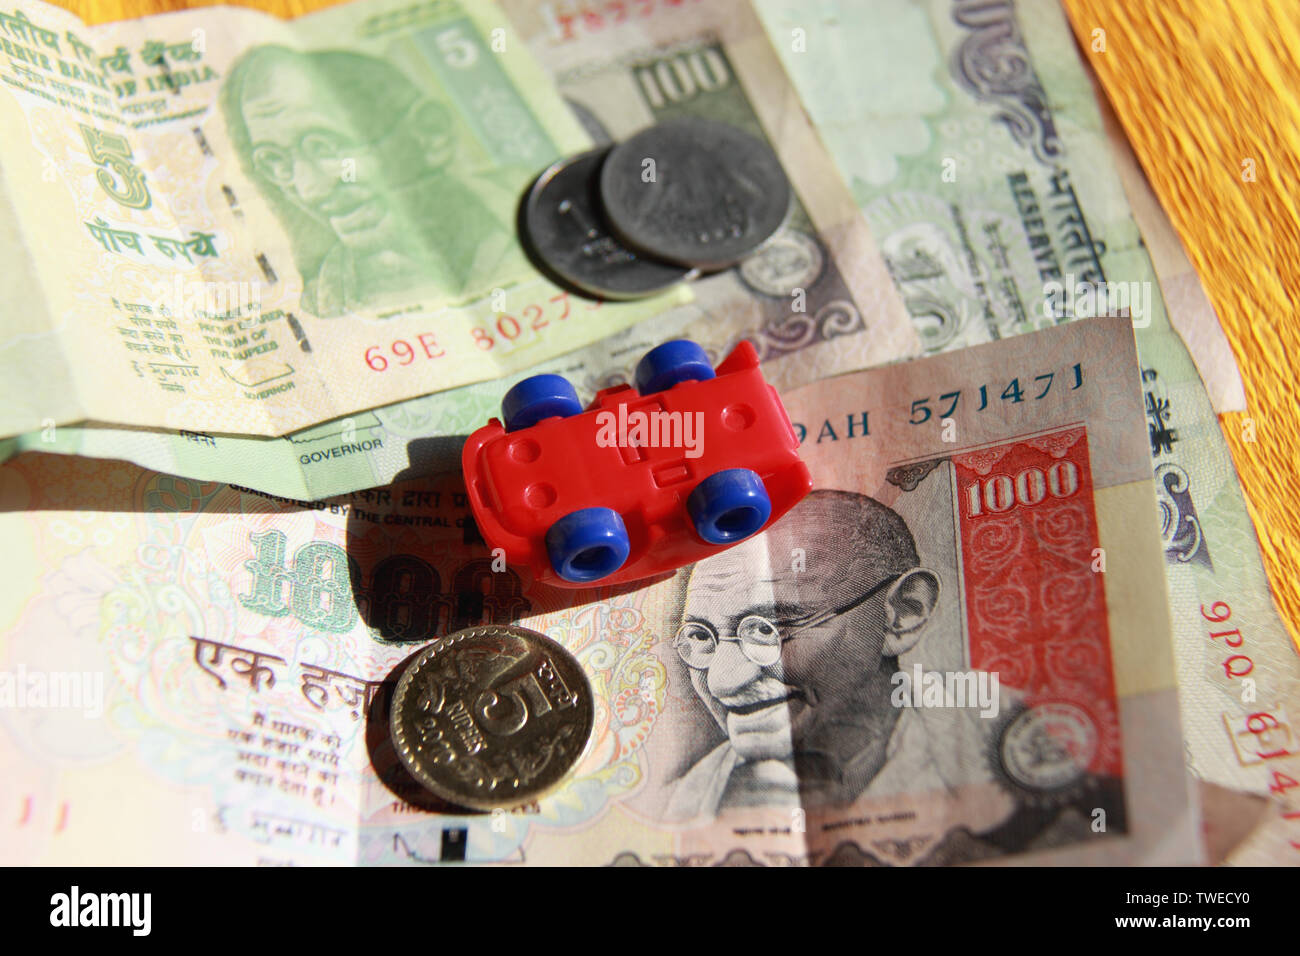 Toy car with Indian banknotes Stock Photo